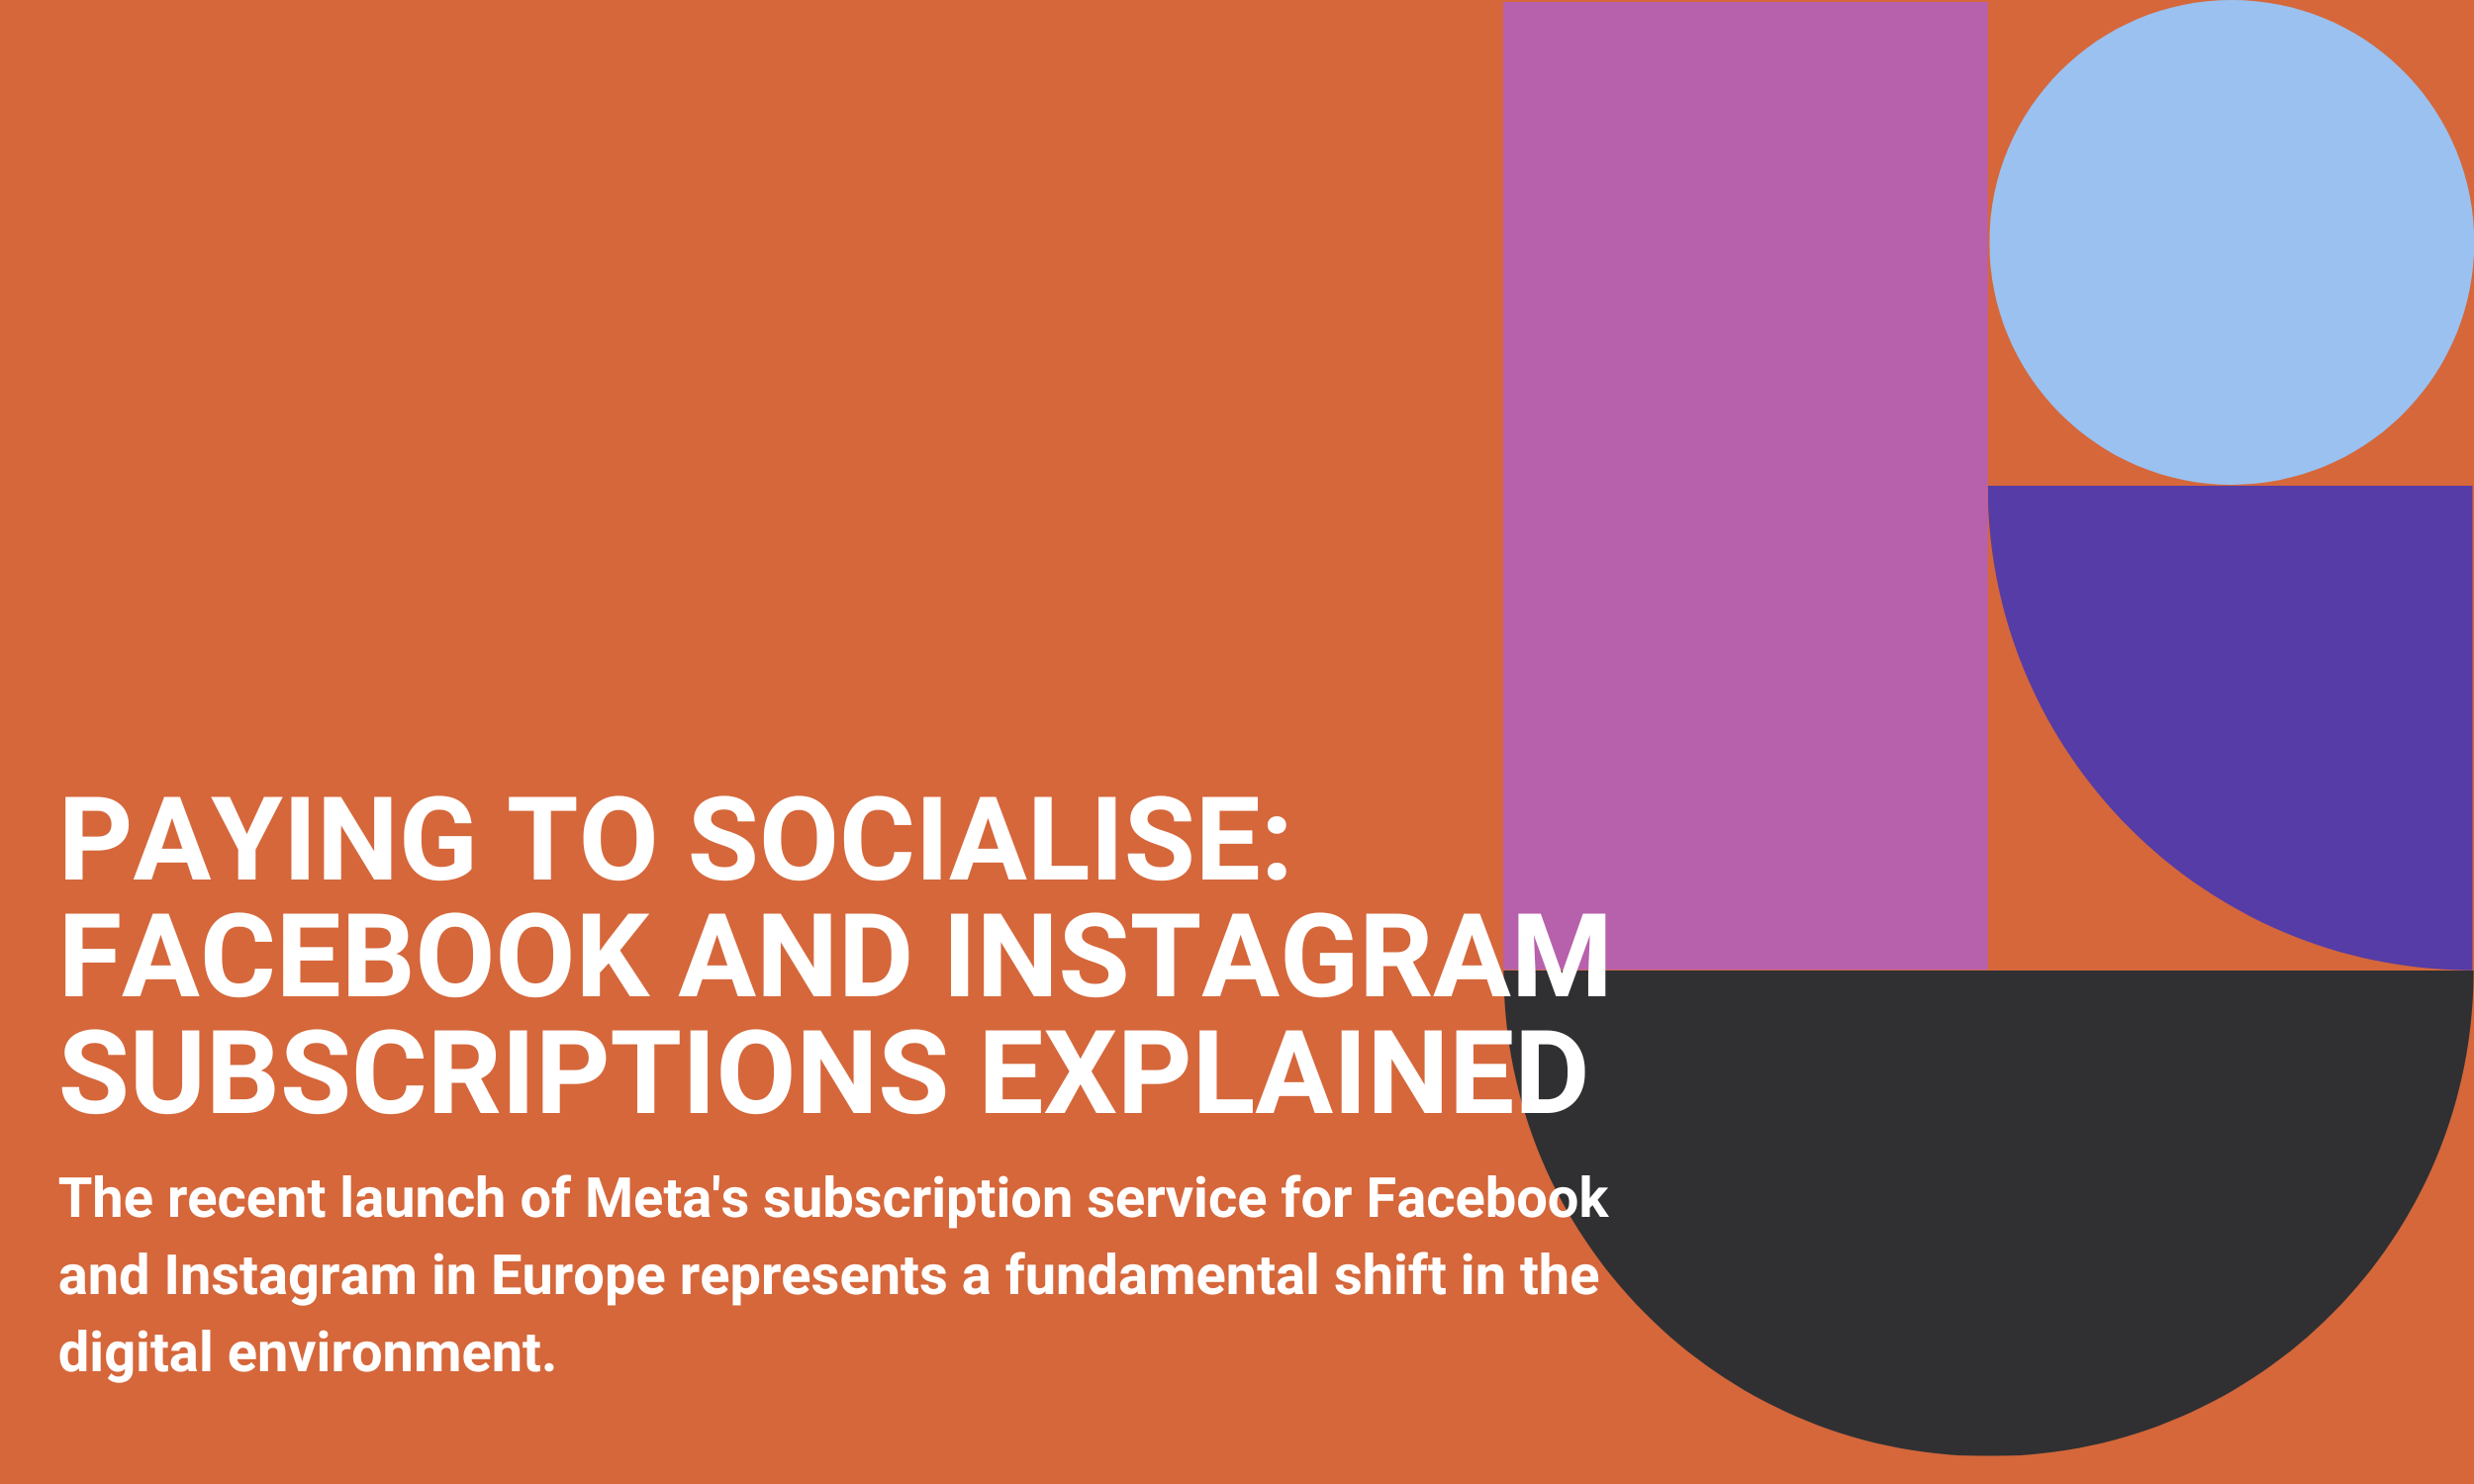 Paying To Socialise: Facebook and Instagram Subscriptions Explained